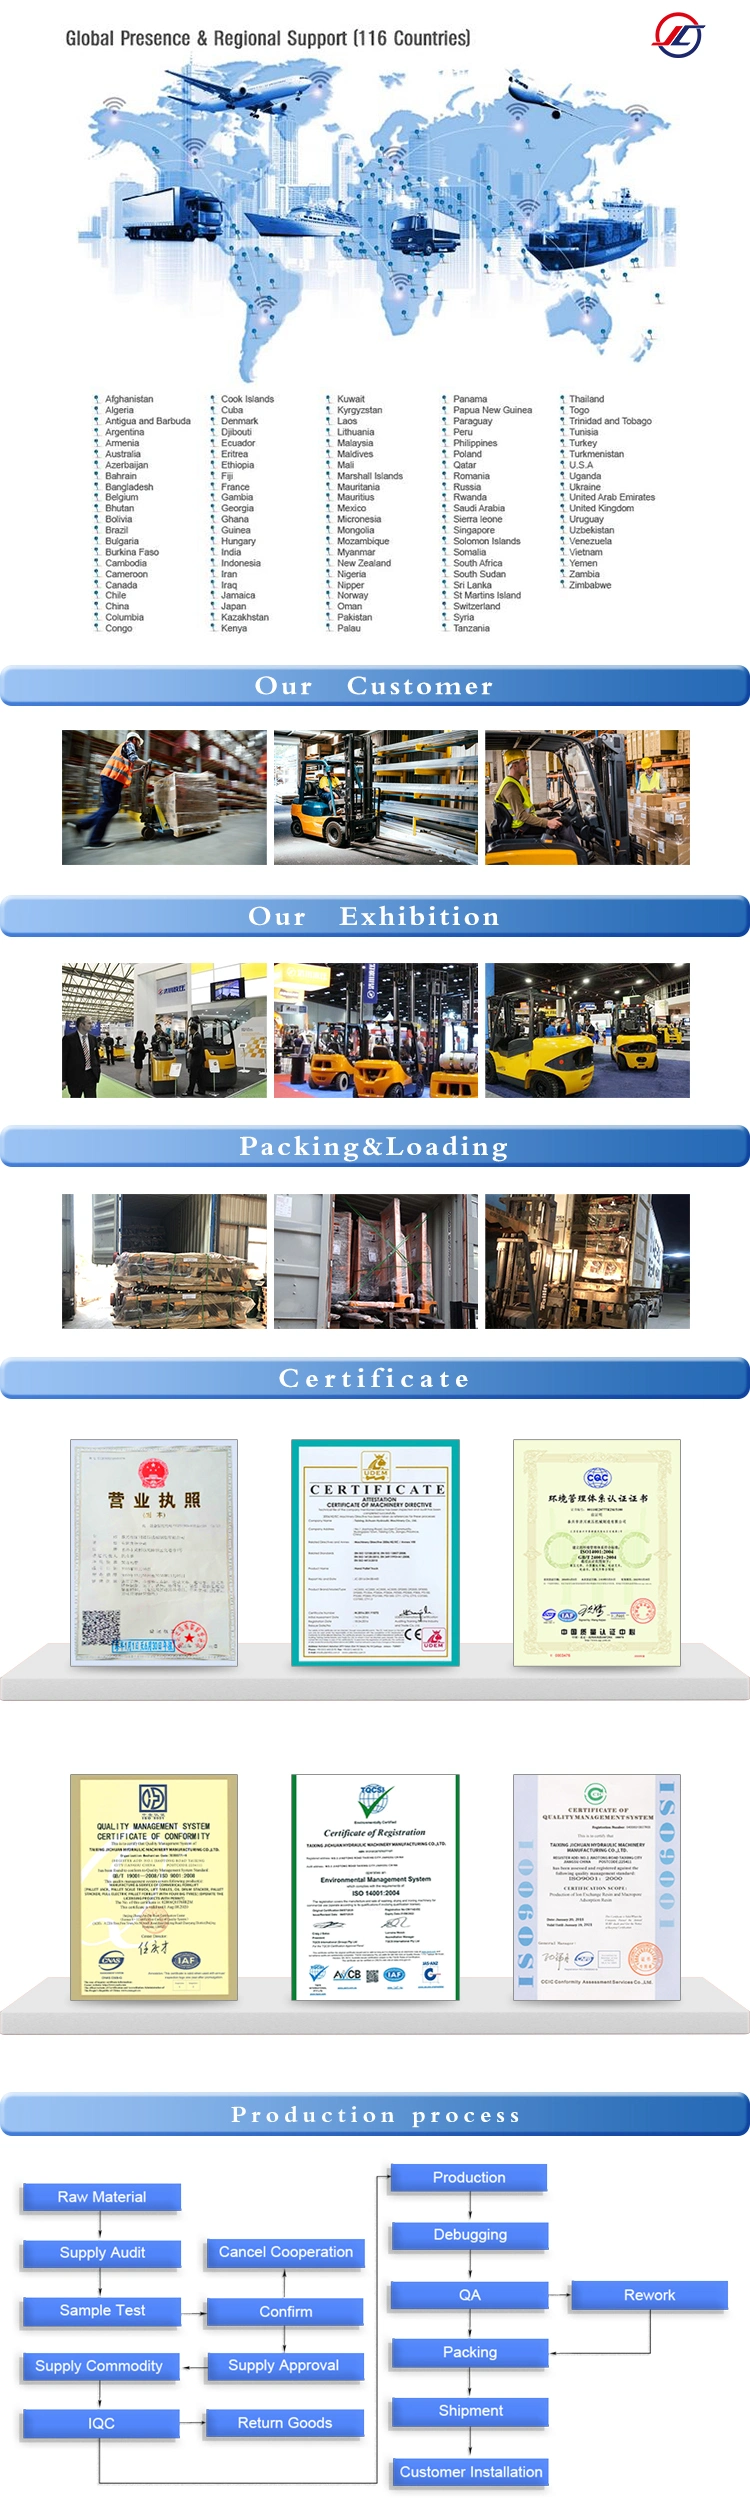 1-5 Ton Mini China Electric Forklifts 1-6m Small Stacker Truck Wheel Battery Forklift Hydraulic Lifting Equipment Can Be Customized Forklift